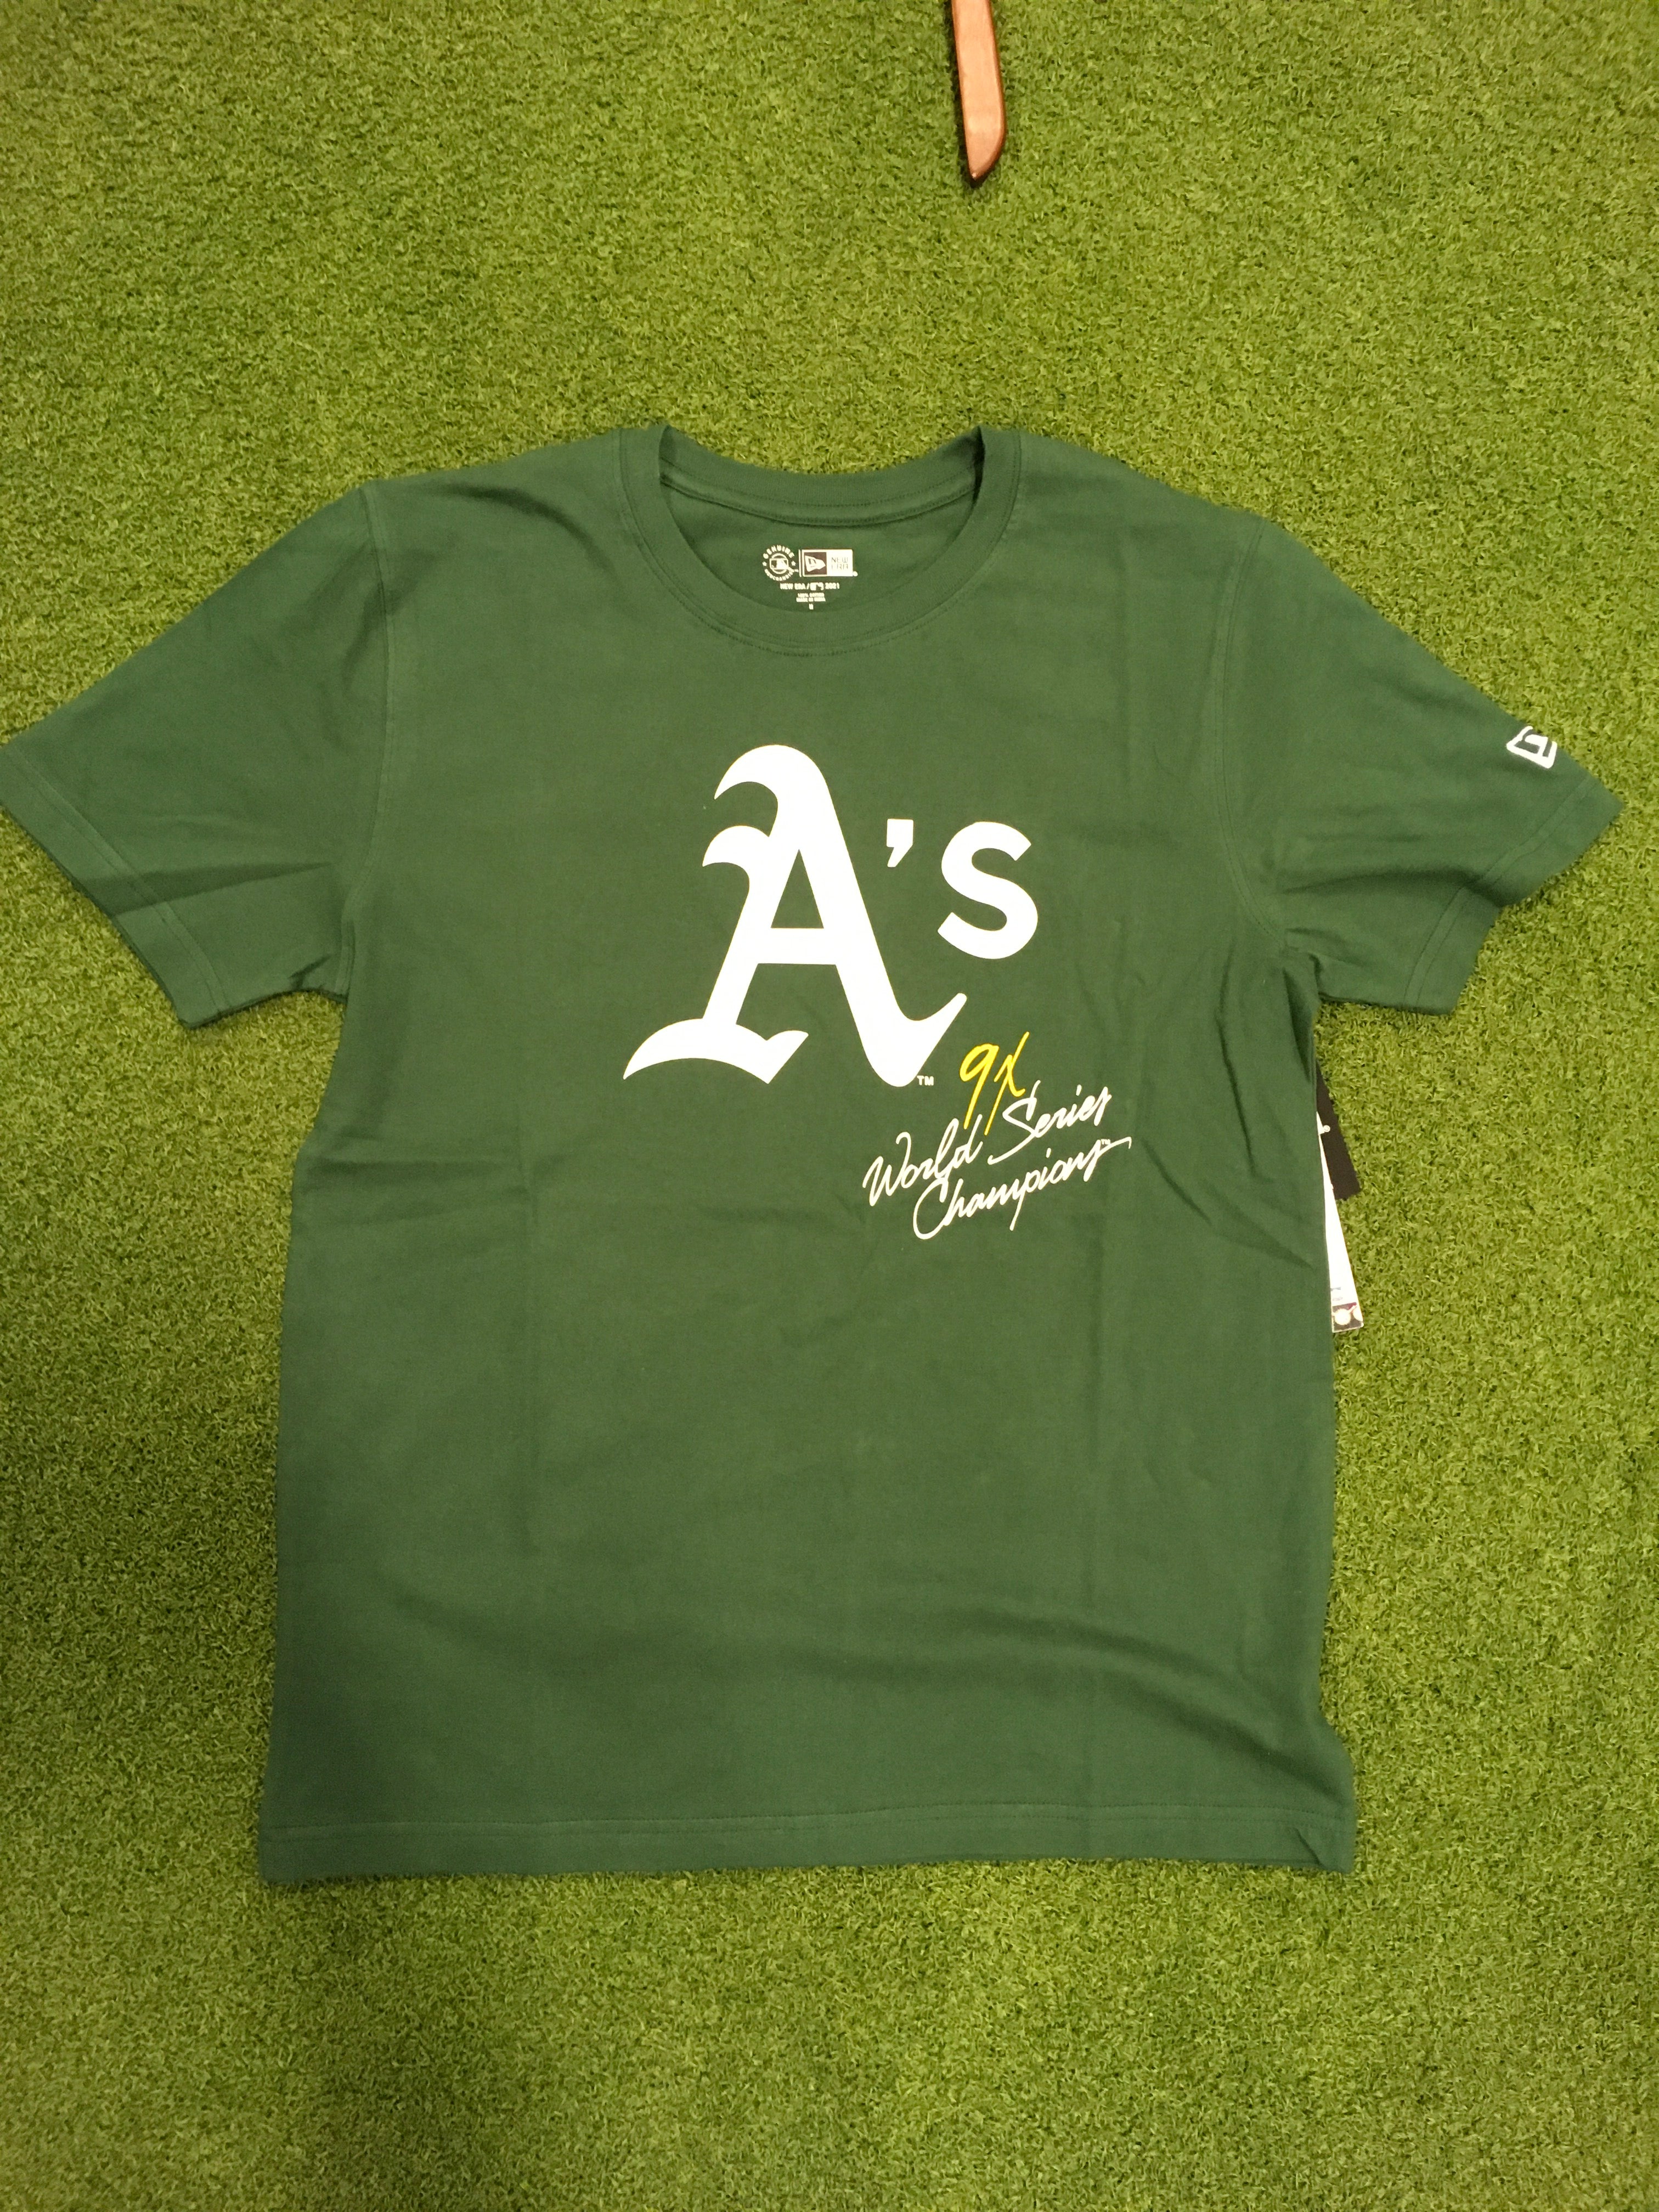 New Cooperstown Collection - Oakland Athletics